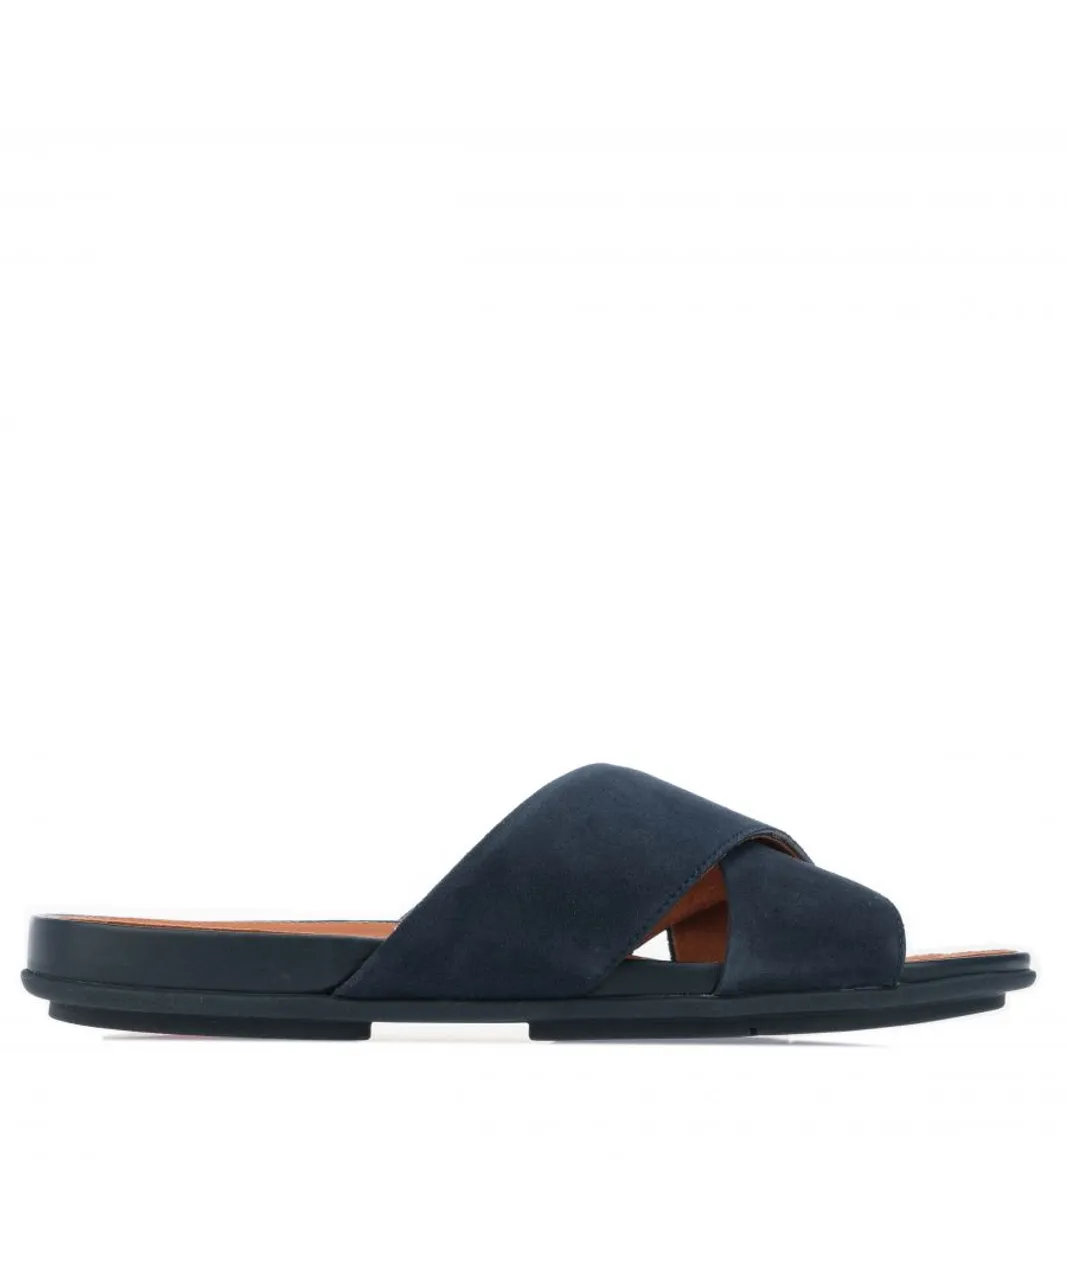 Fitflop Womenss Fit Flop Gracie Suede Cross Slide Sandals in Navy